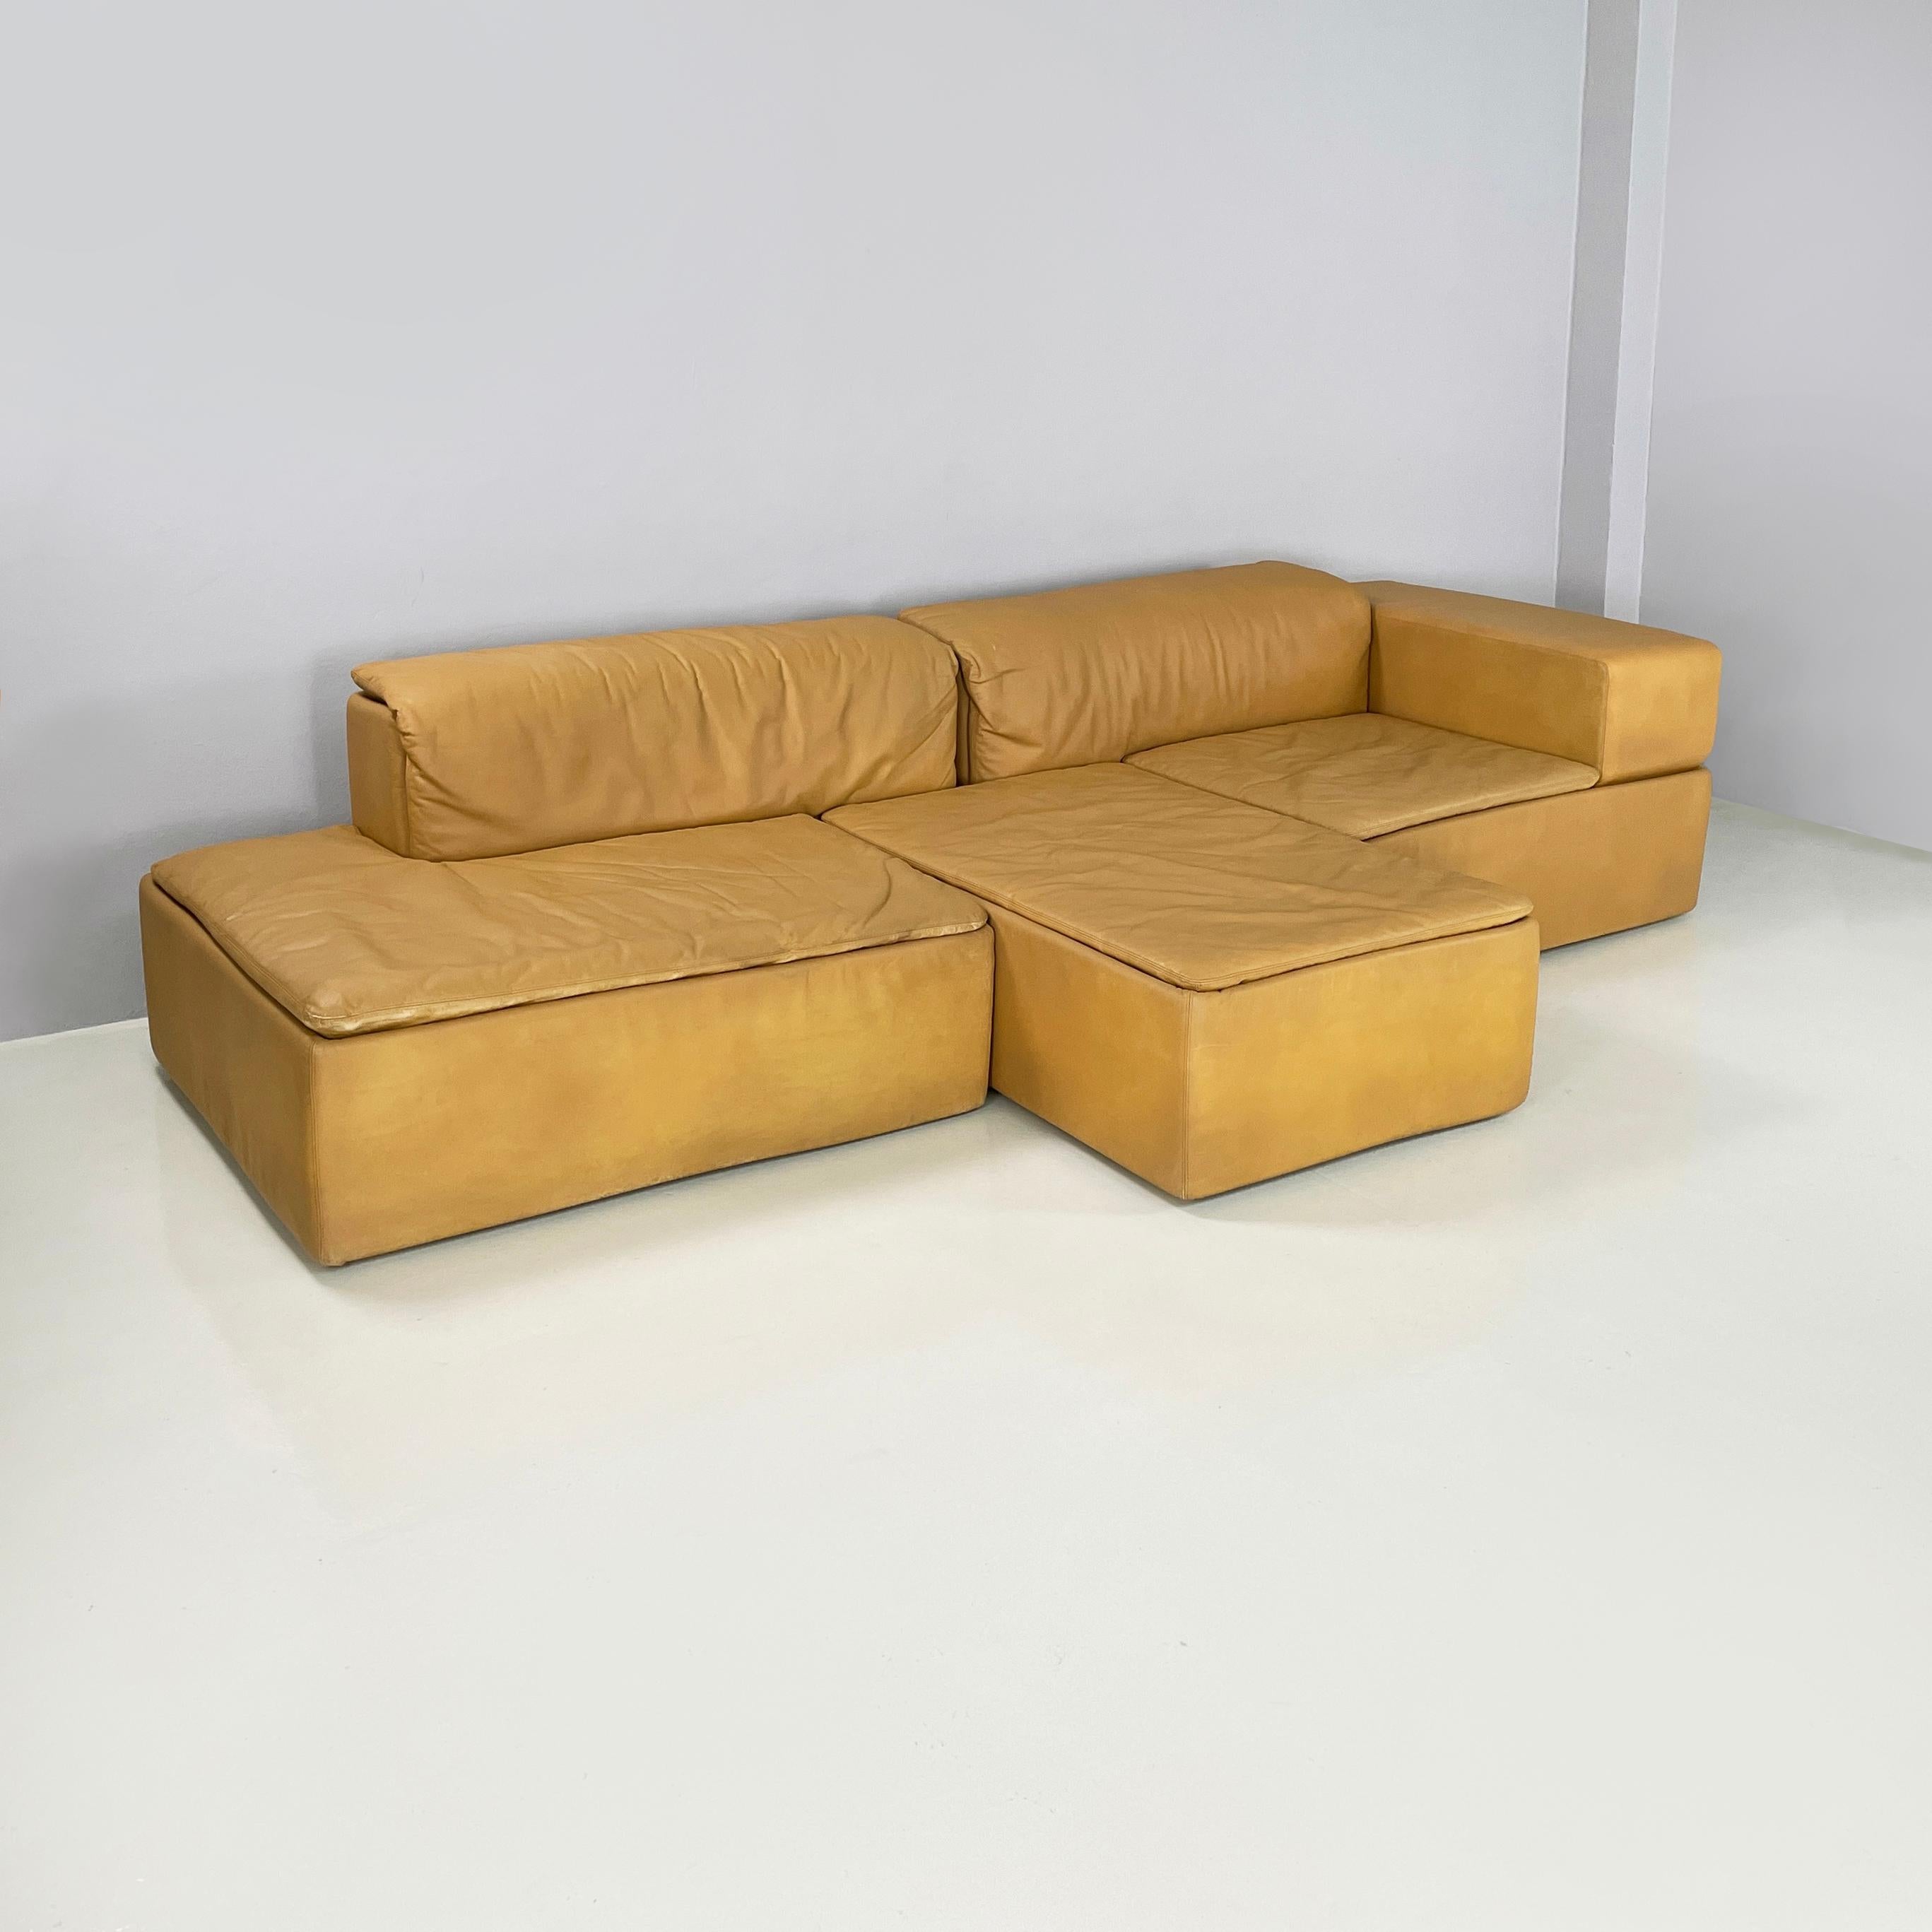 Modern Italian modern Brown leather modular sofa Paione by Salocchi for Sormani, 1970s For Sale